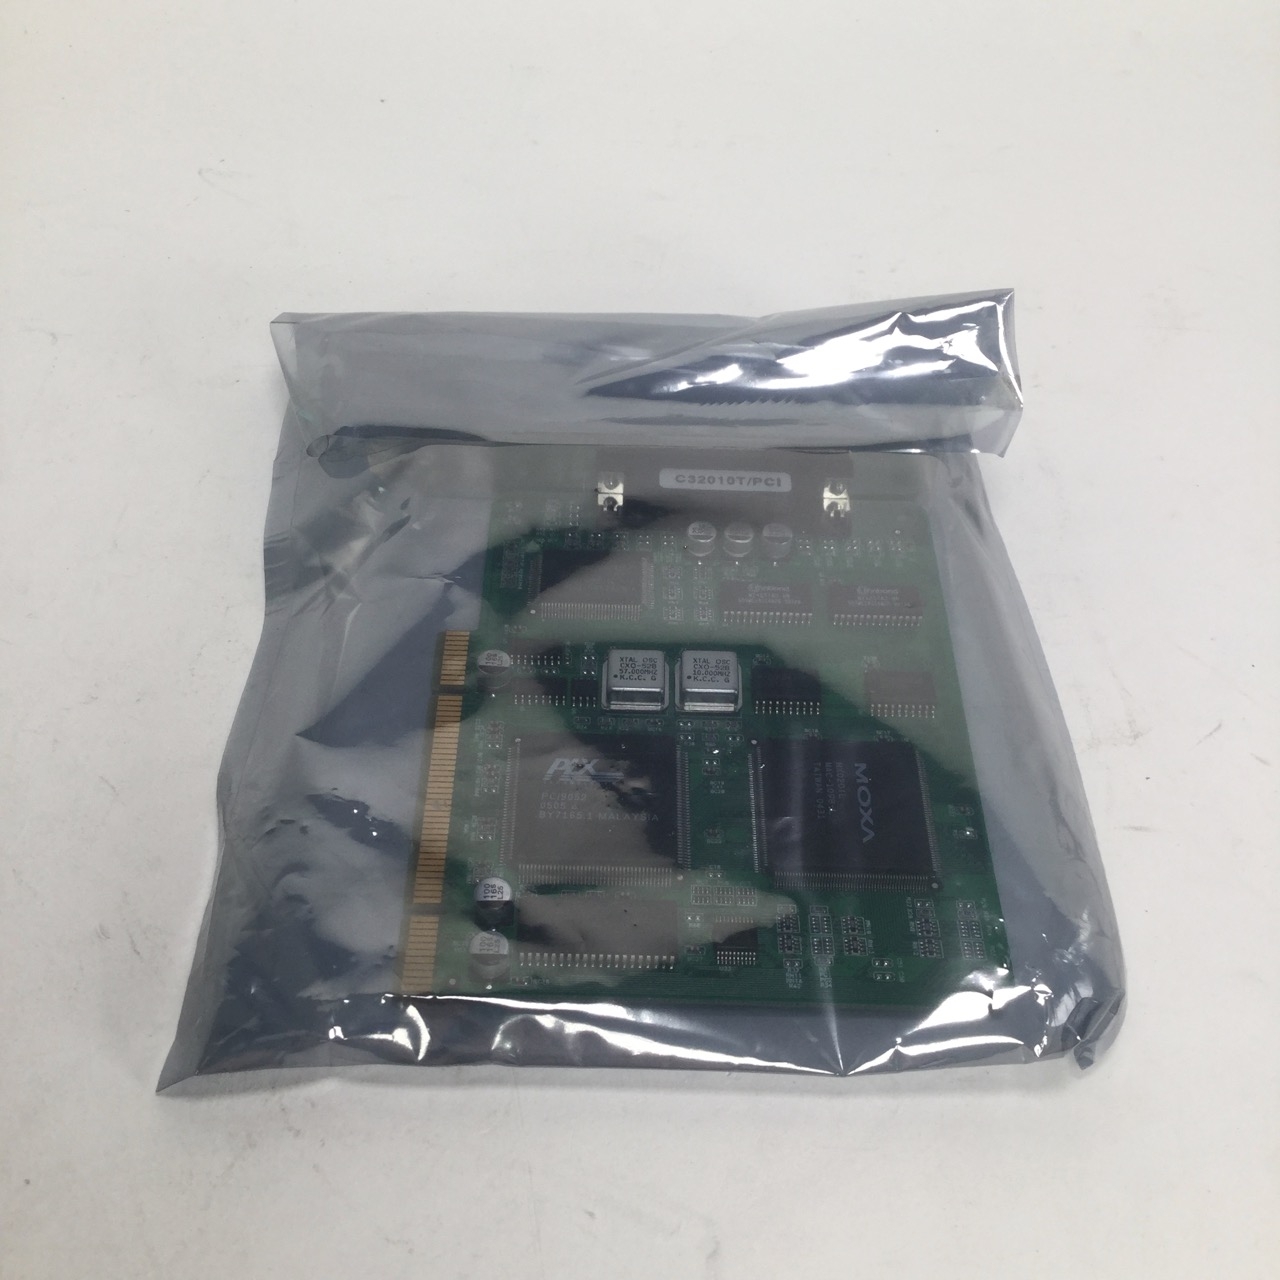 Moxa C32010T/PCI V2.0 up to 32 port UPCI control board card NEW NFP